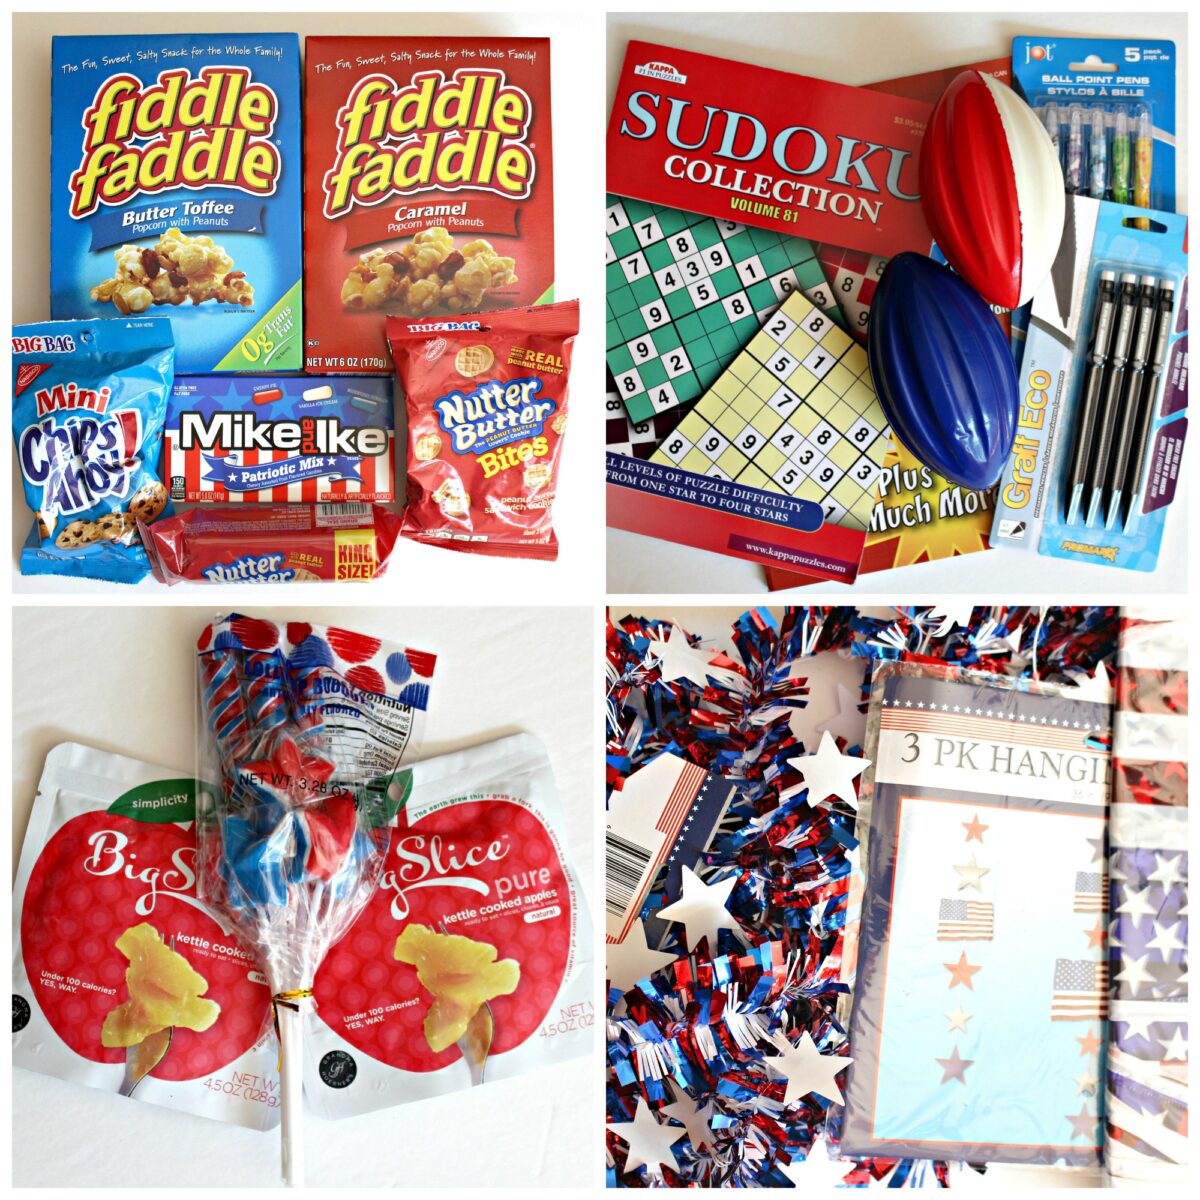 Care package contents: packaged cookies and popcorn, puzzle books, snacks, patriotic decorations.